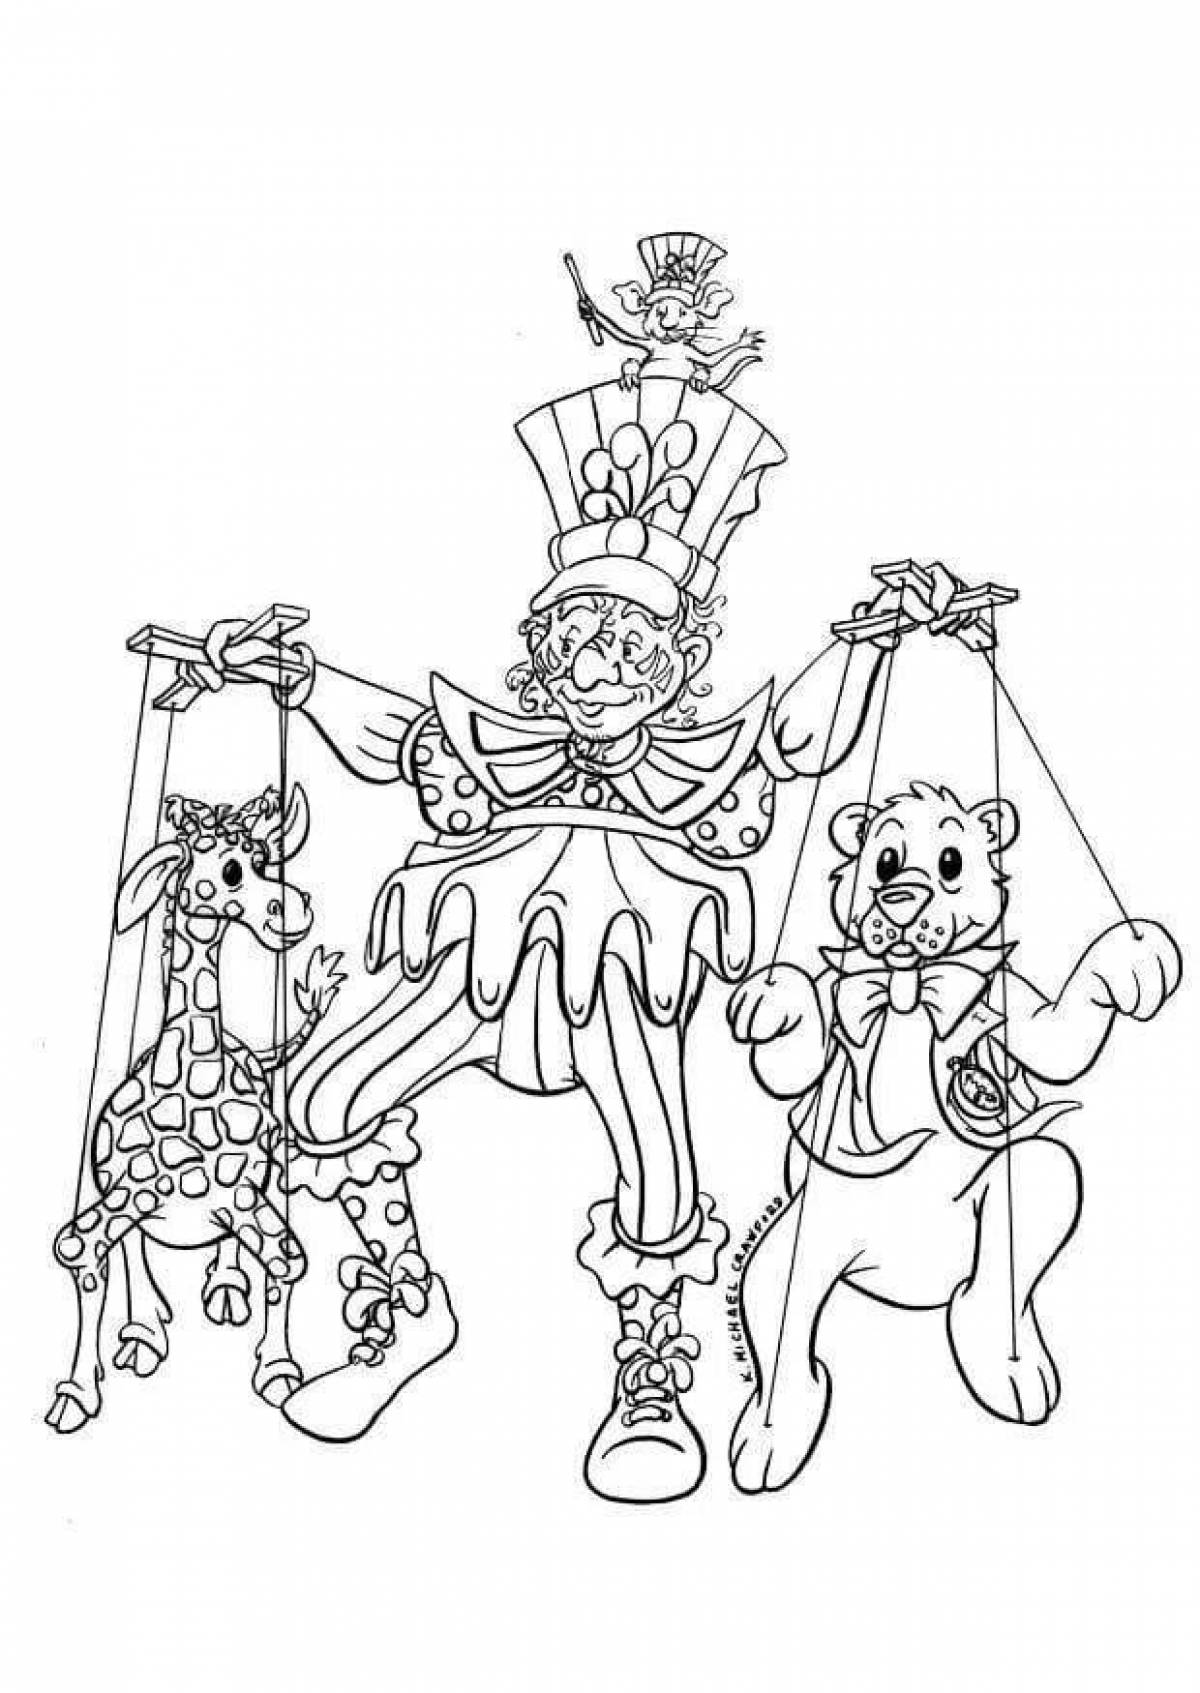 Coloring page luminous puppet theater